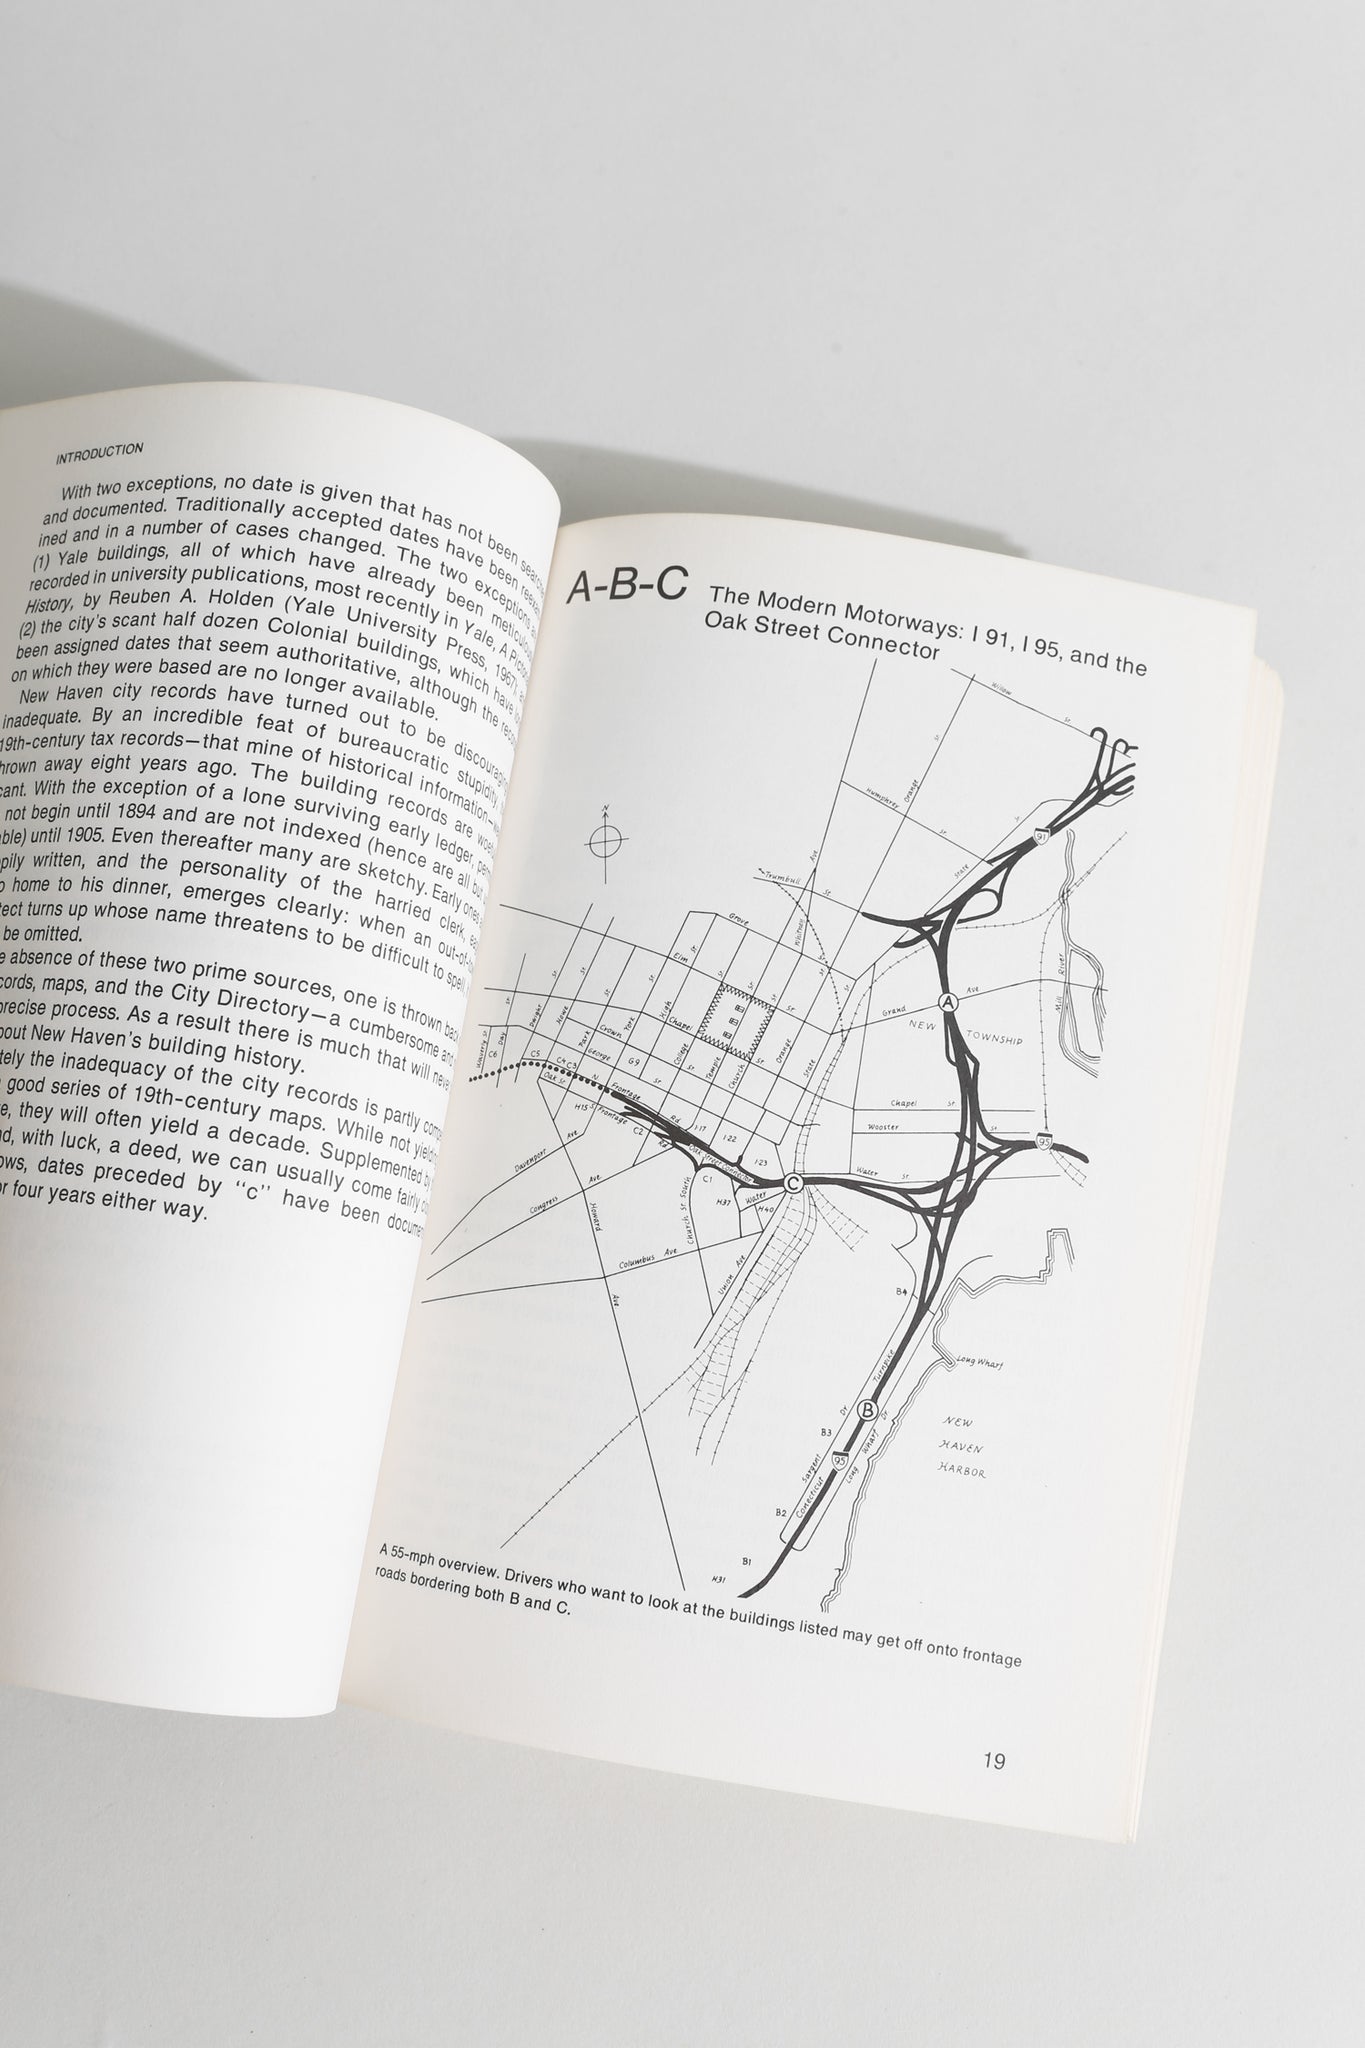 New Haven, A Guide to Architecture and Urban Design Book